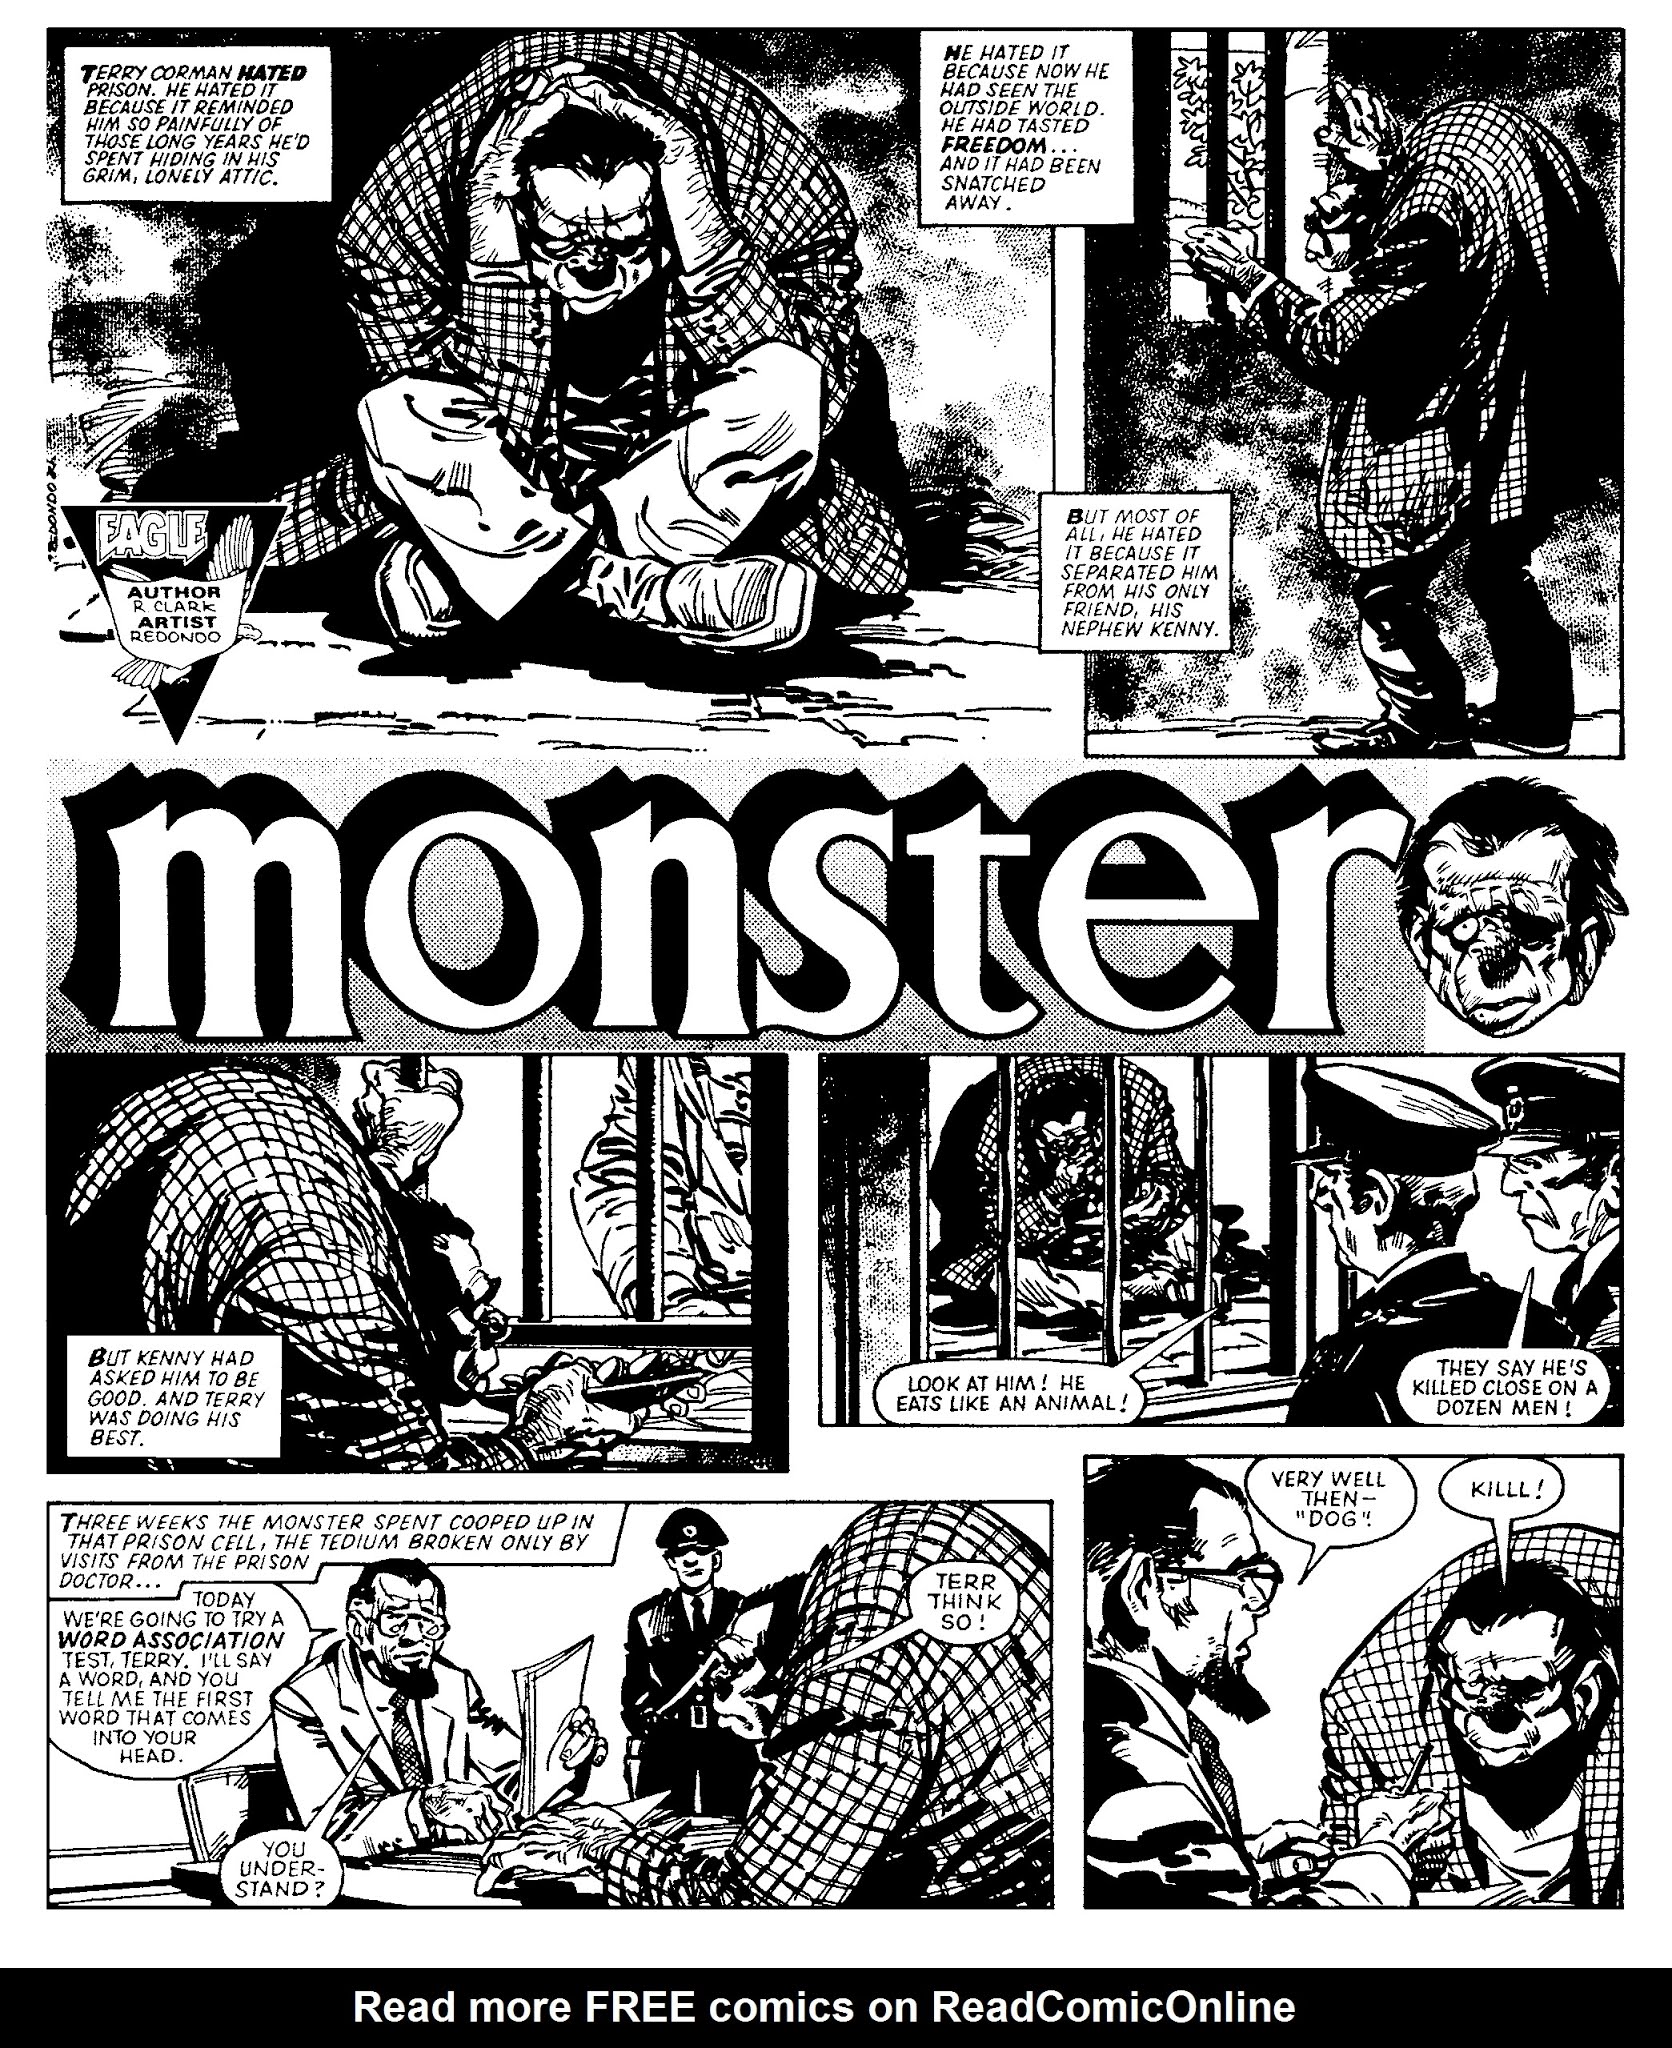 Read online Monster comic -  Issue # TPB (Part 2) - 27